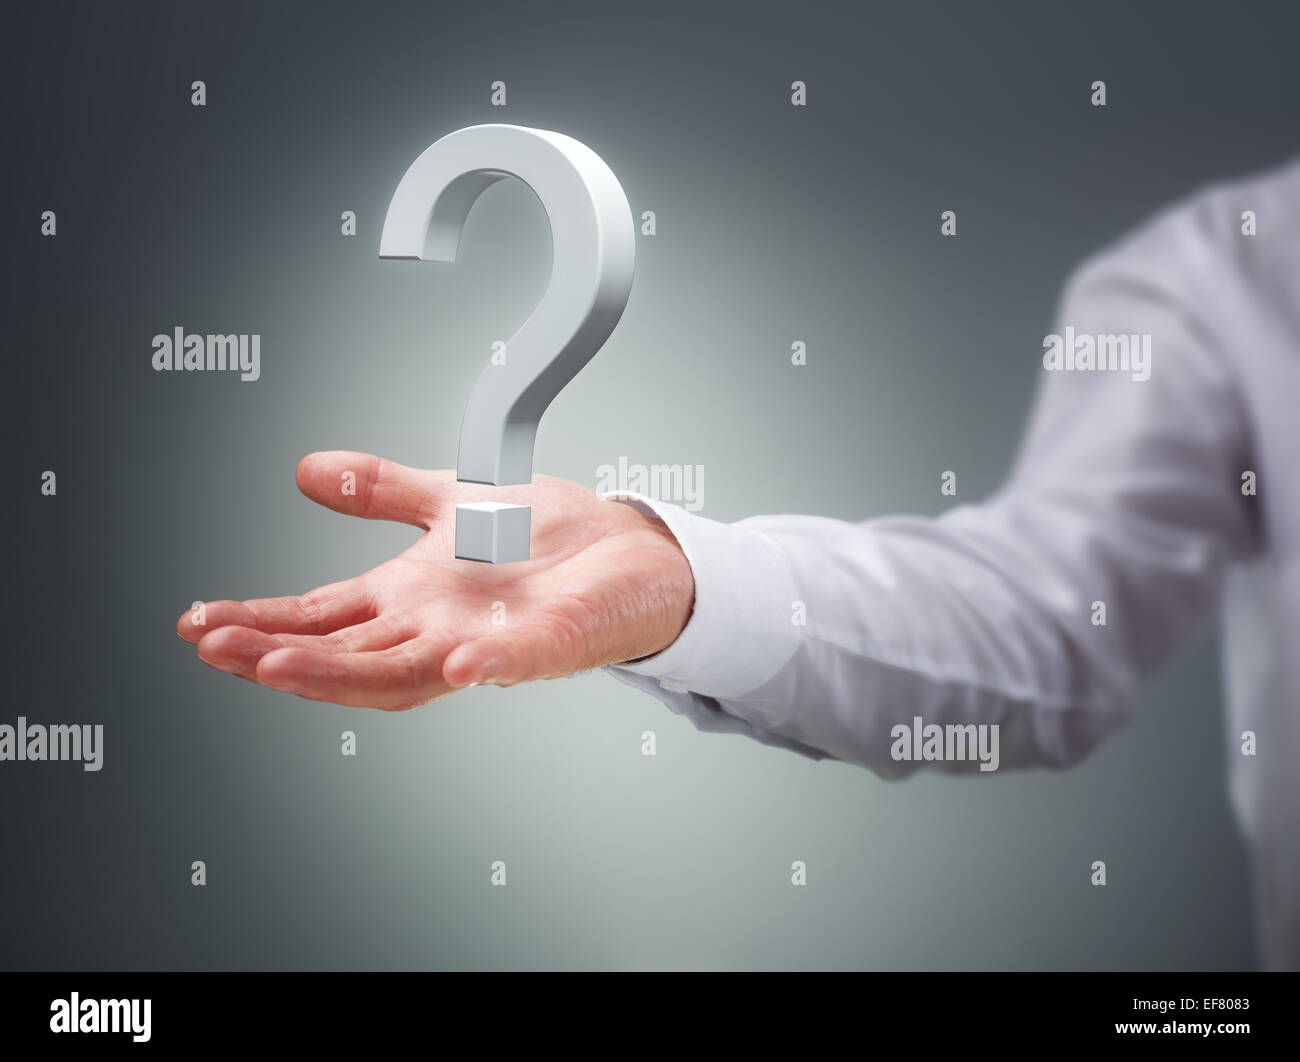 Businessman holding a virtual question mark concept for confusion, choice, searching or decisions Stock Photo